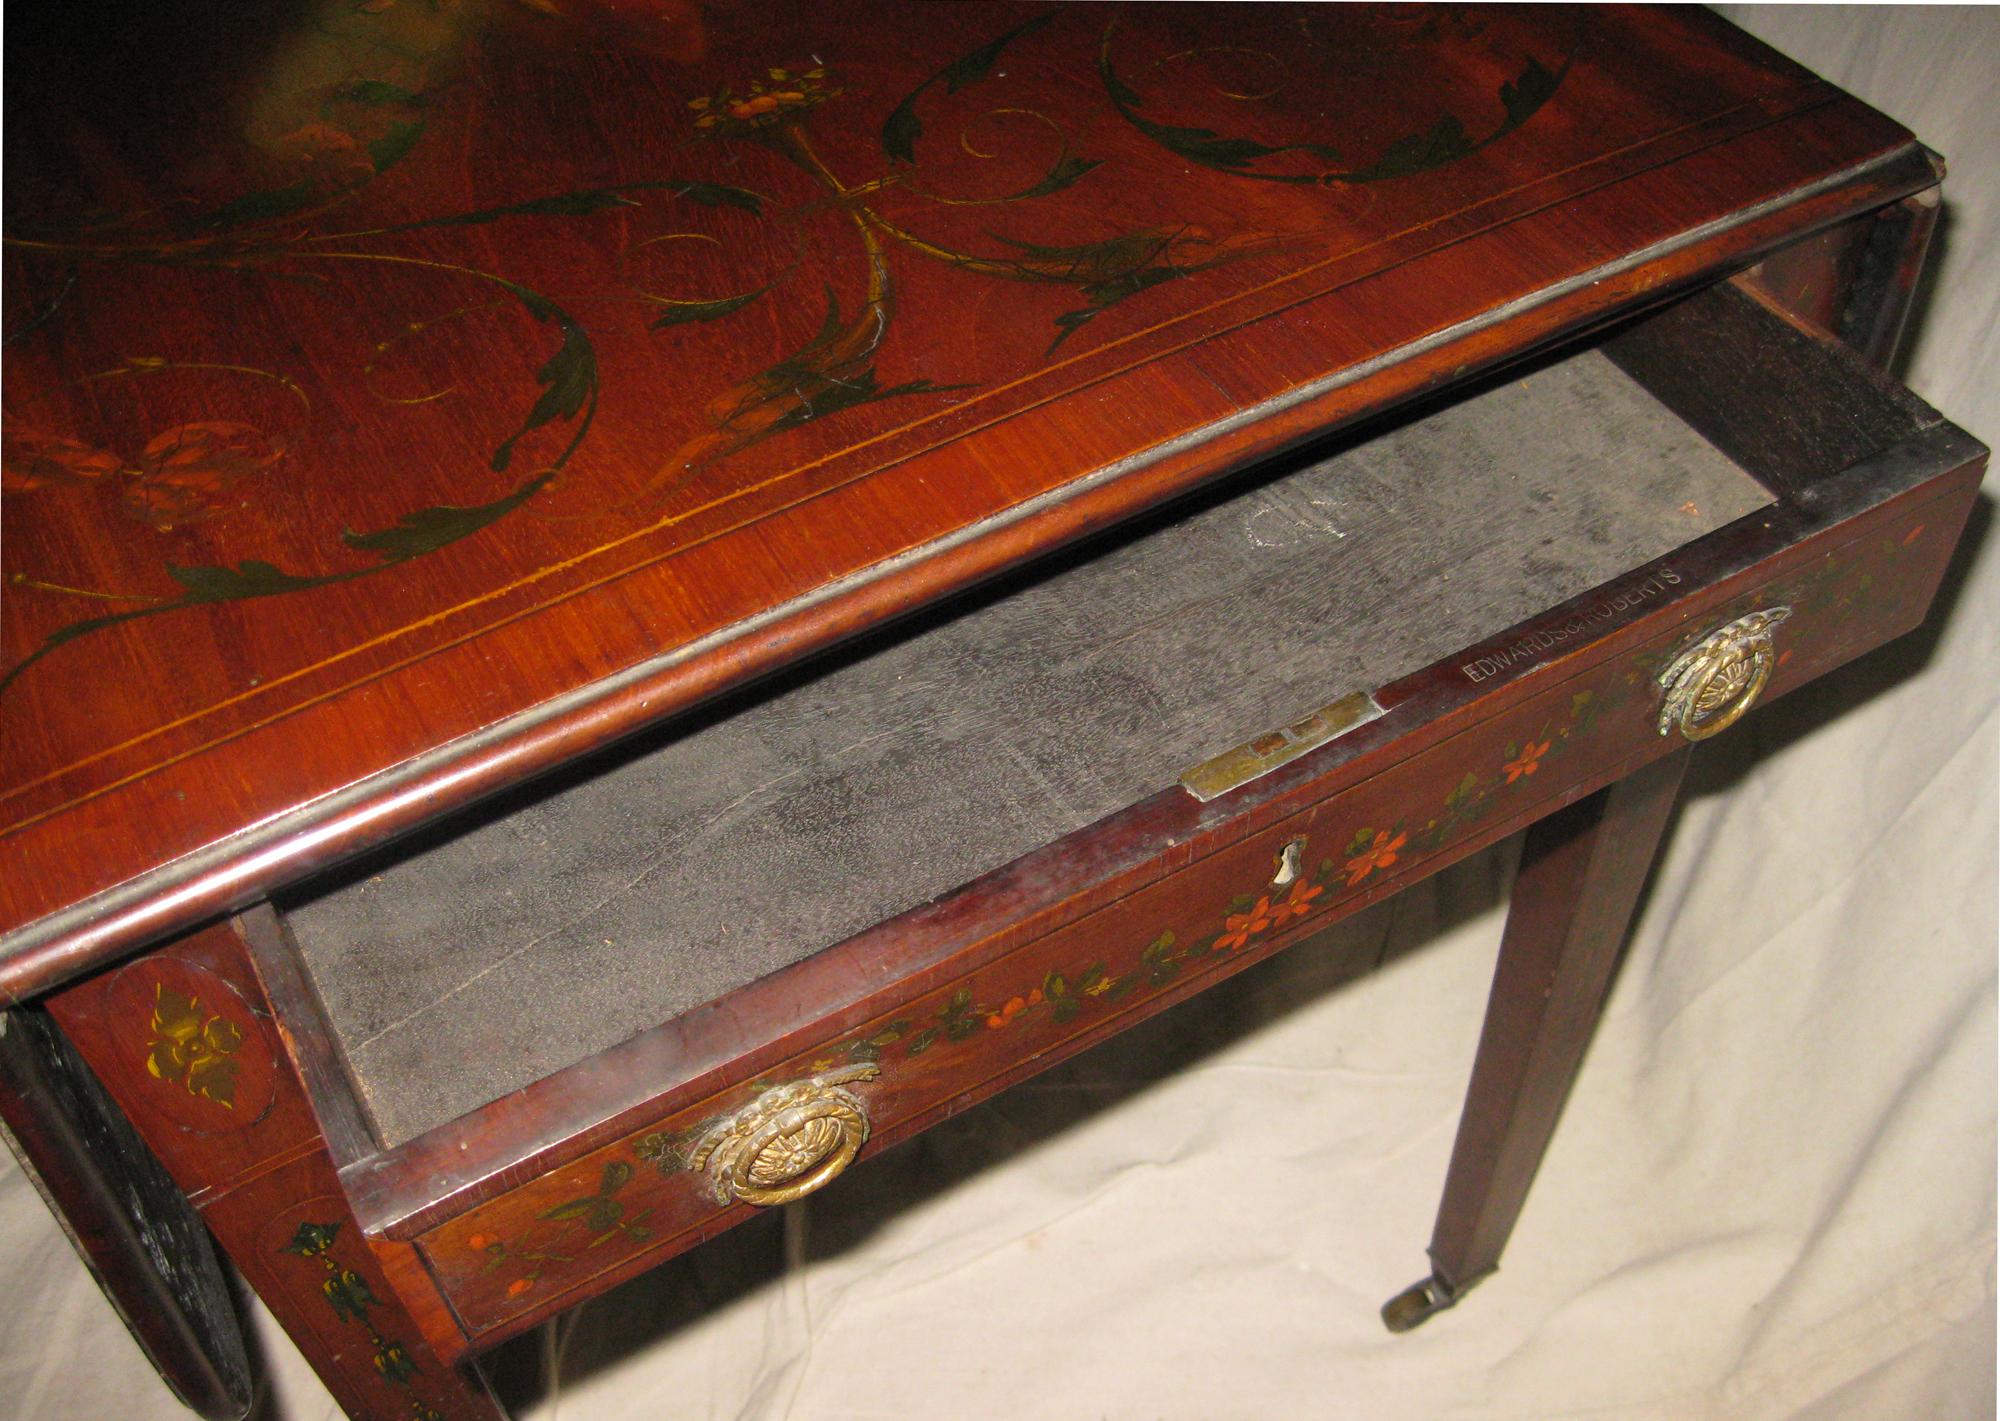 Neoclassical Revival 19thc Mahogany Pembroke Table Edwards & Roberts London w/ Decorative Painting  For Sale